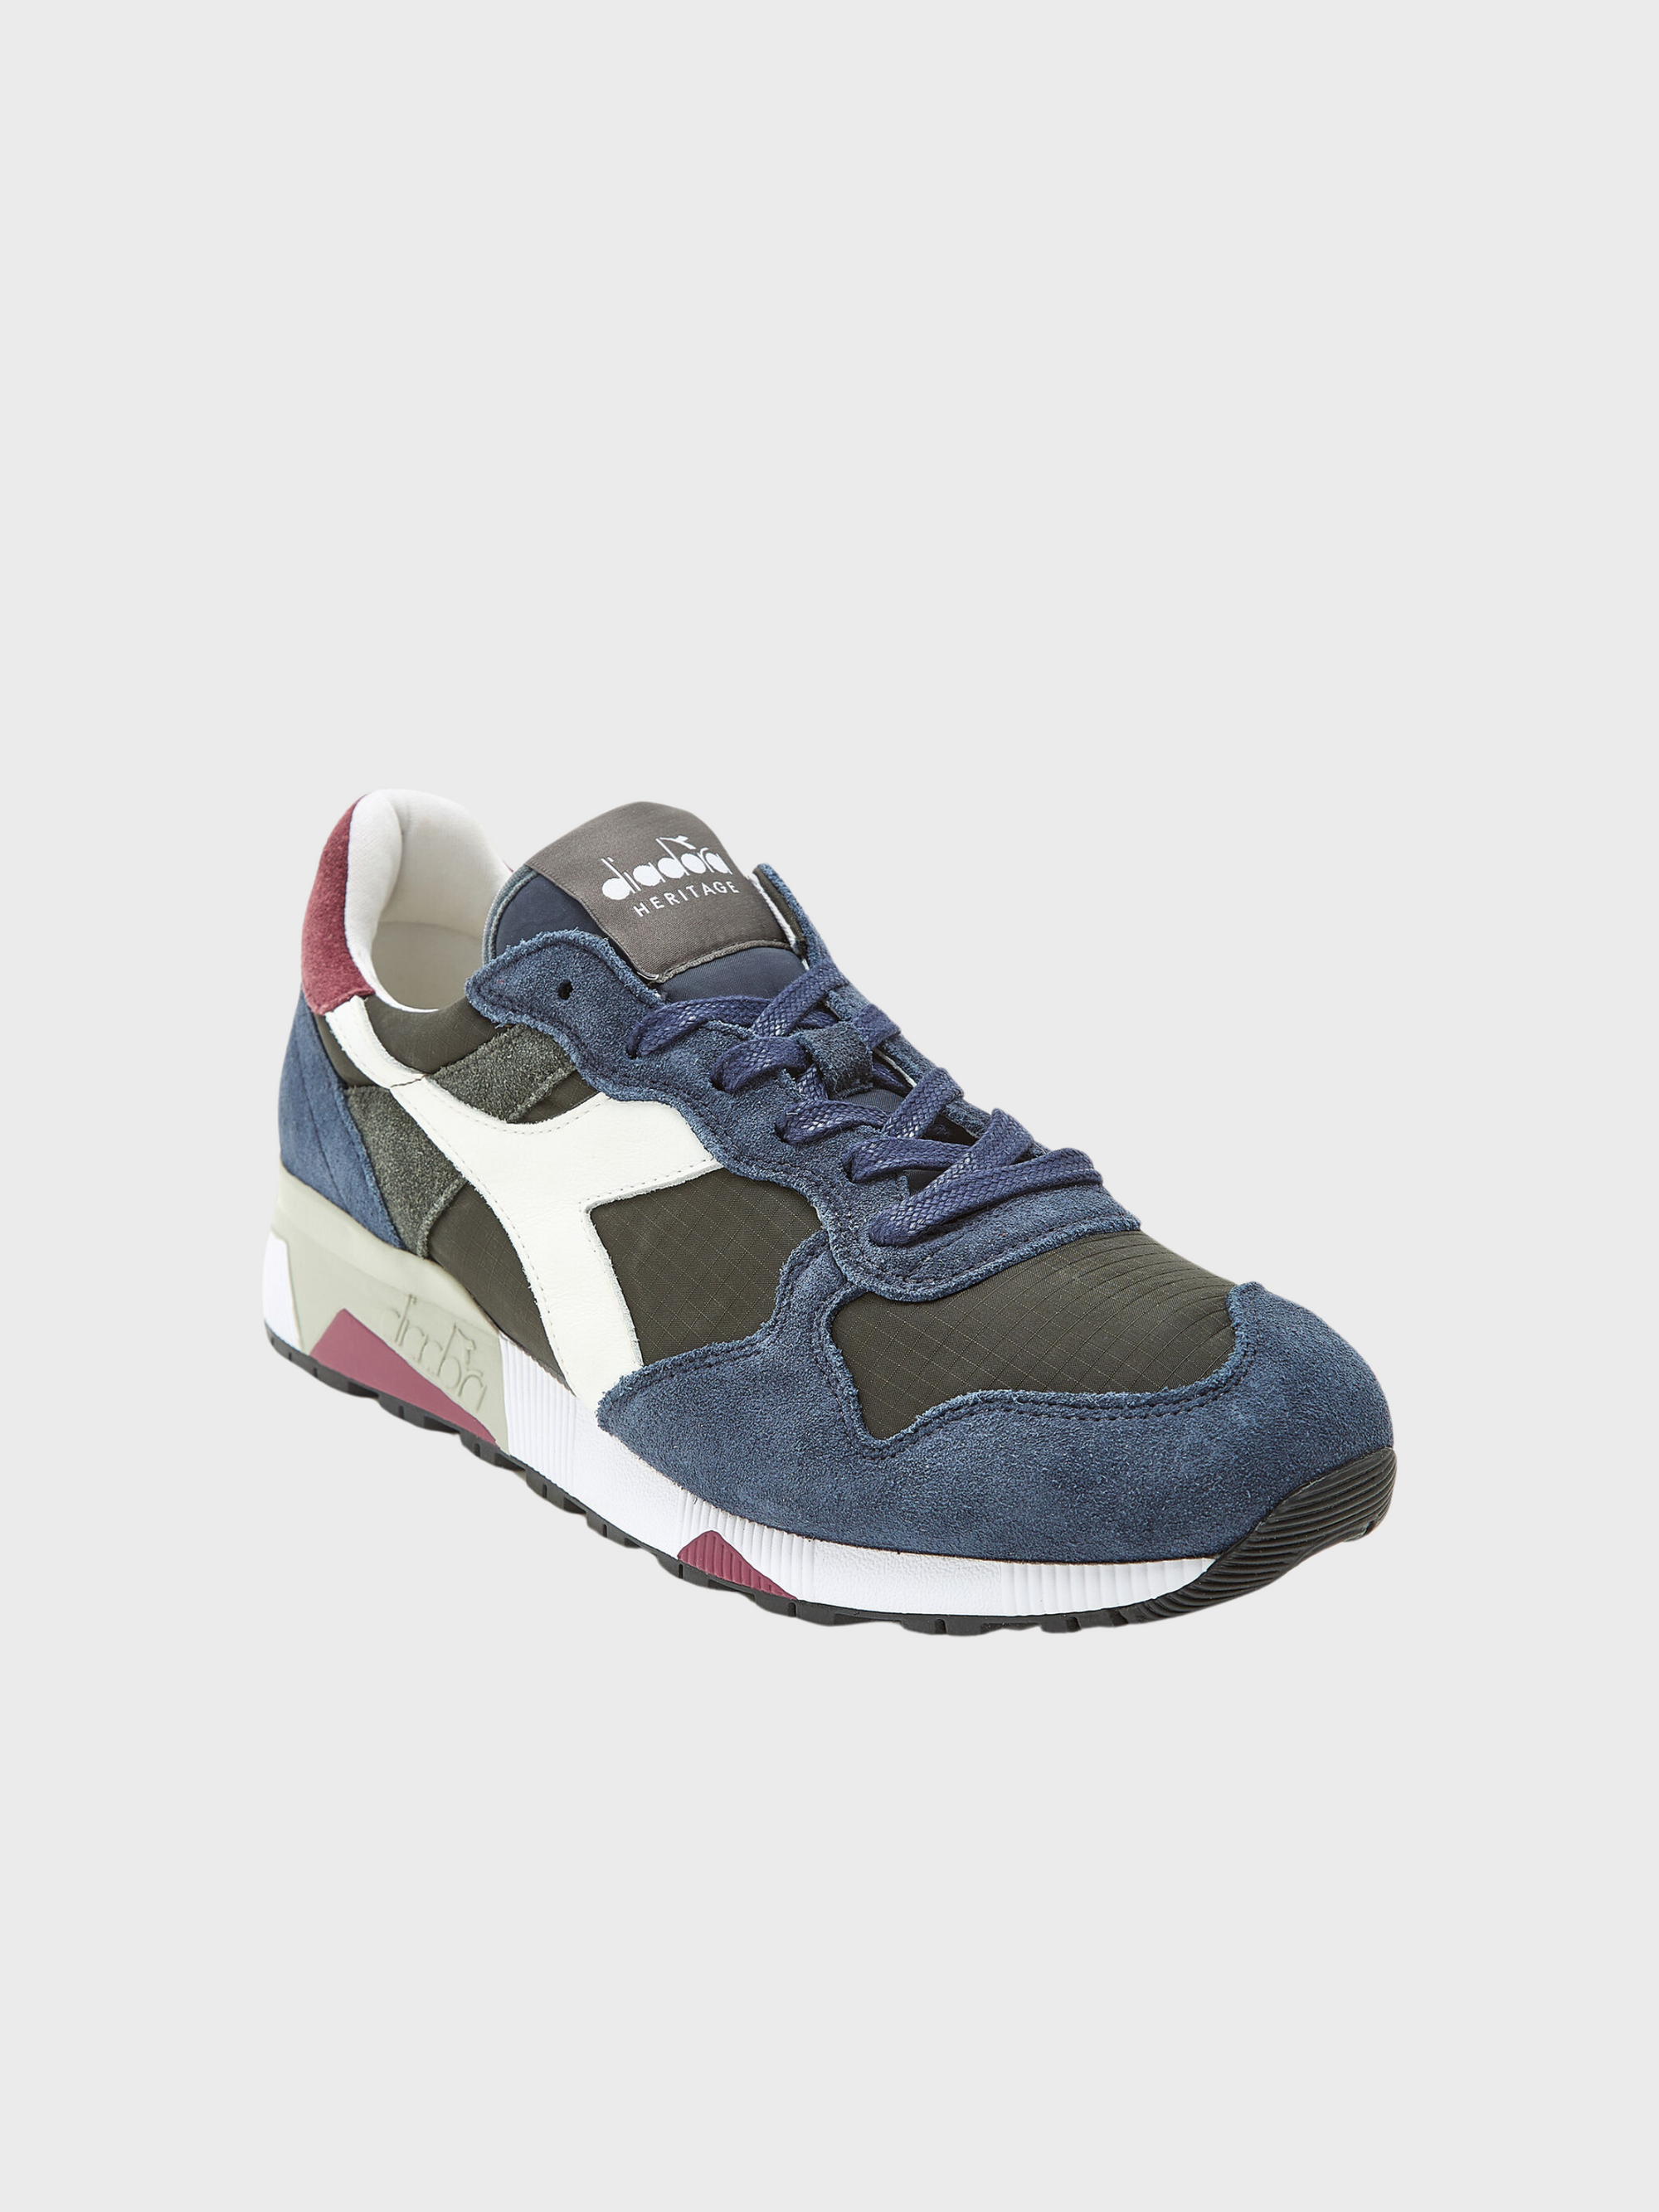 Diadora - Trident 90 Ripstop Sneaker - Forest Night-Men's Sneakers-Yaletown-Vancouver-Surrey-Canada